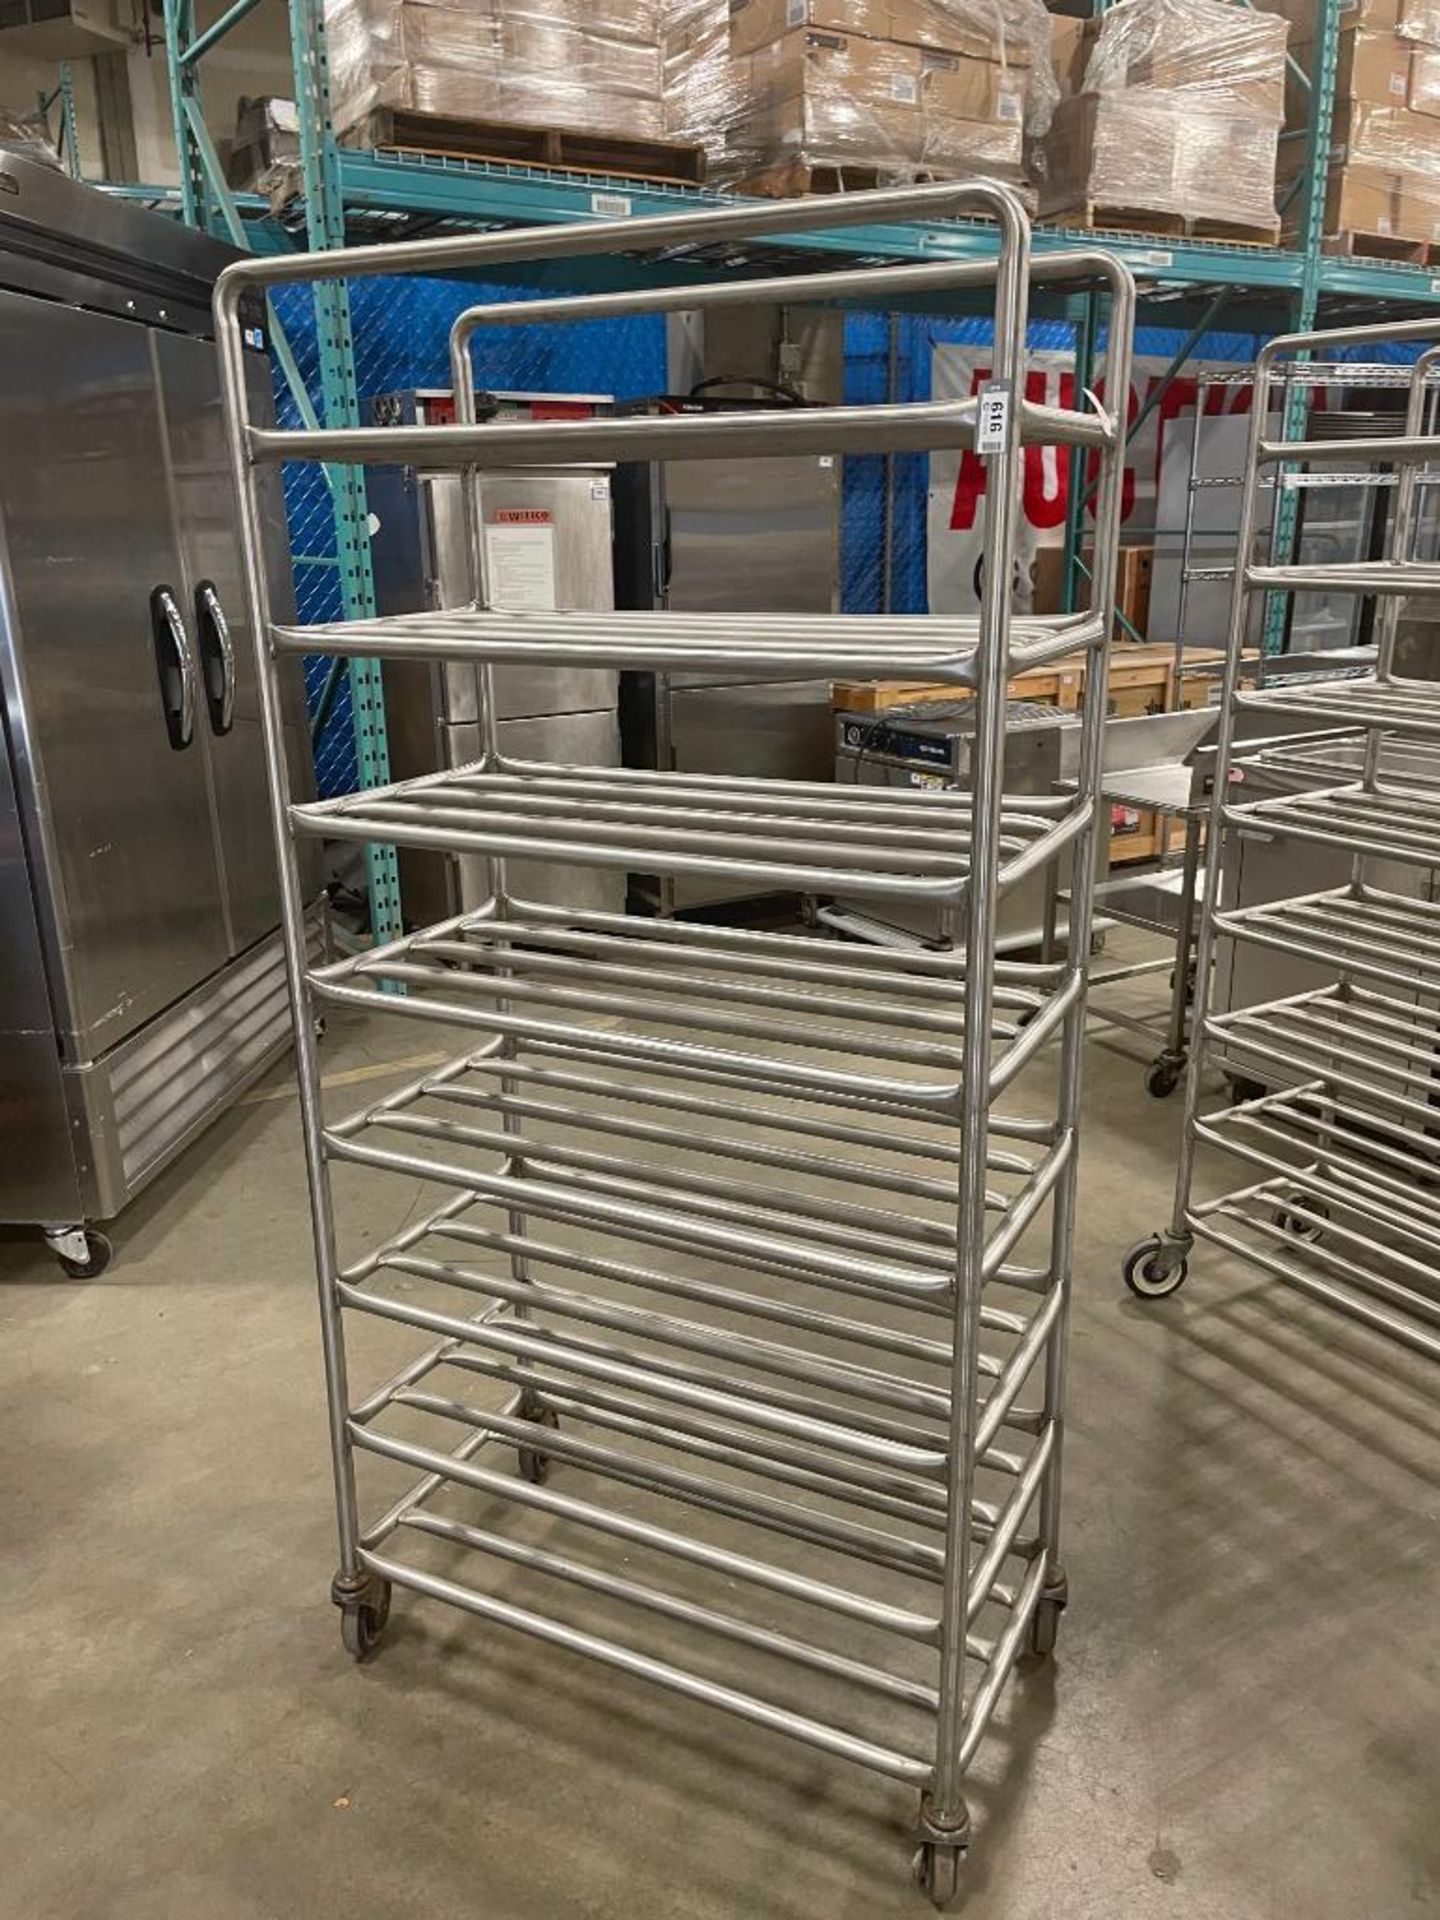 8 TIER STAINLESS STEEL MOBILE PLATTER CART - Image 3 of 4